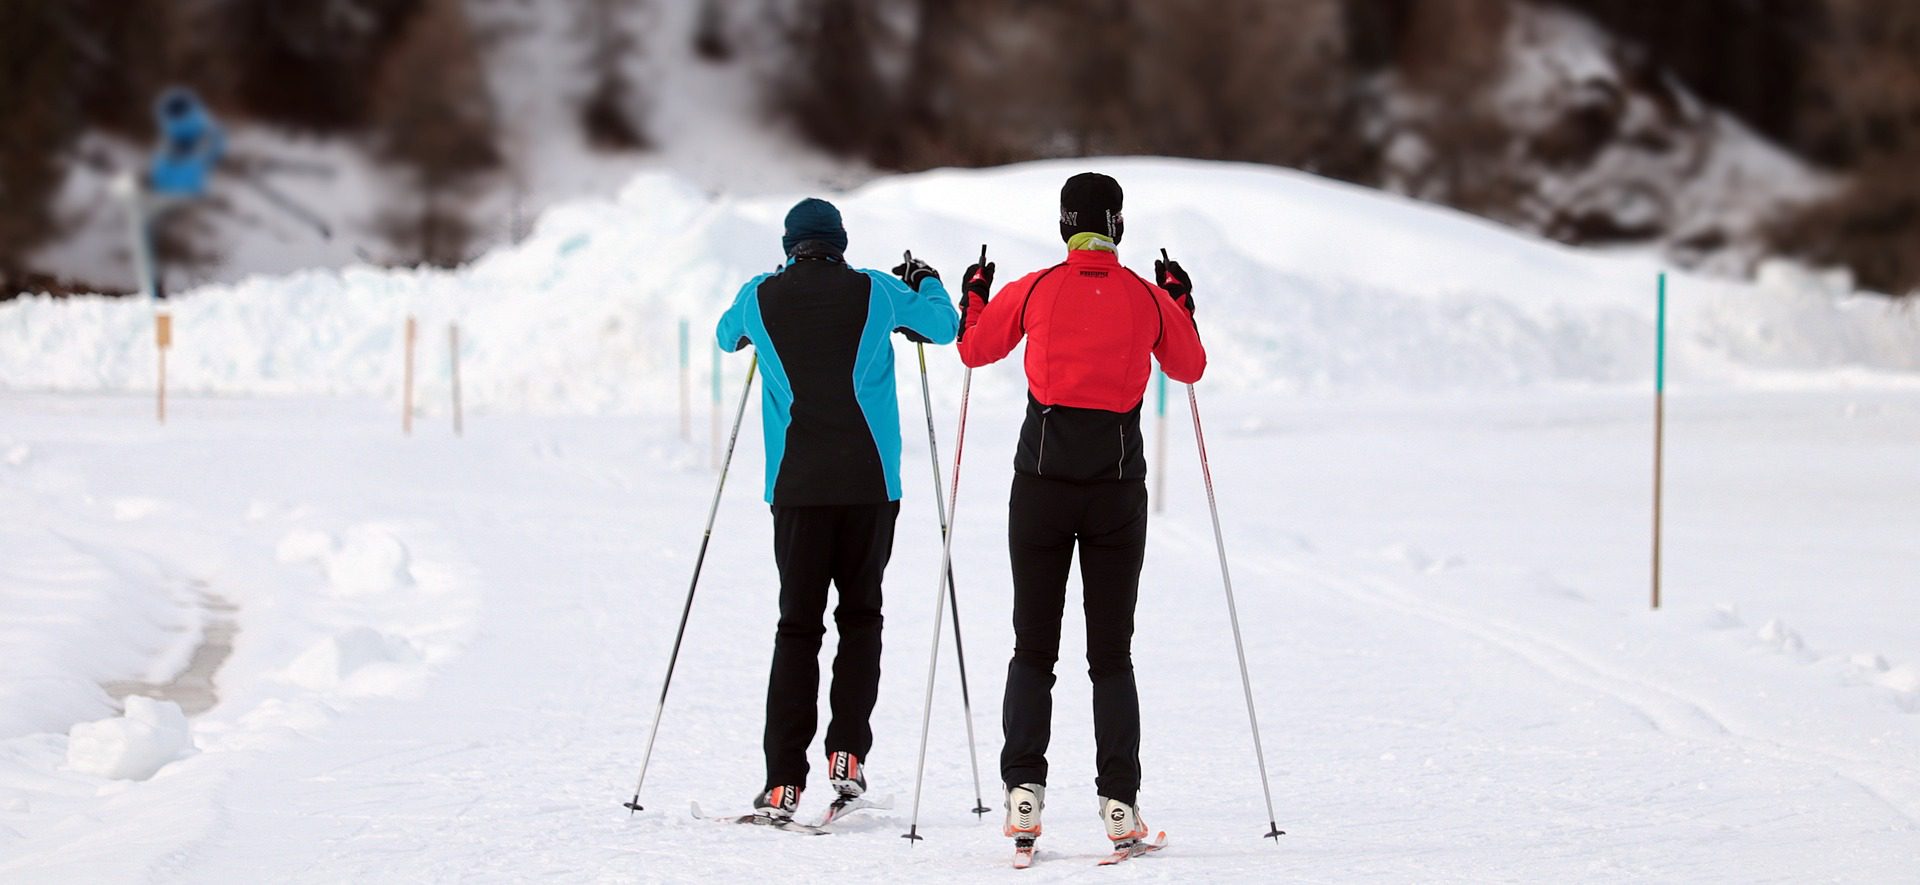 Picture of two people doing cross-country skiing taken from the back with snow on the background